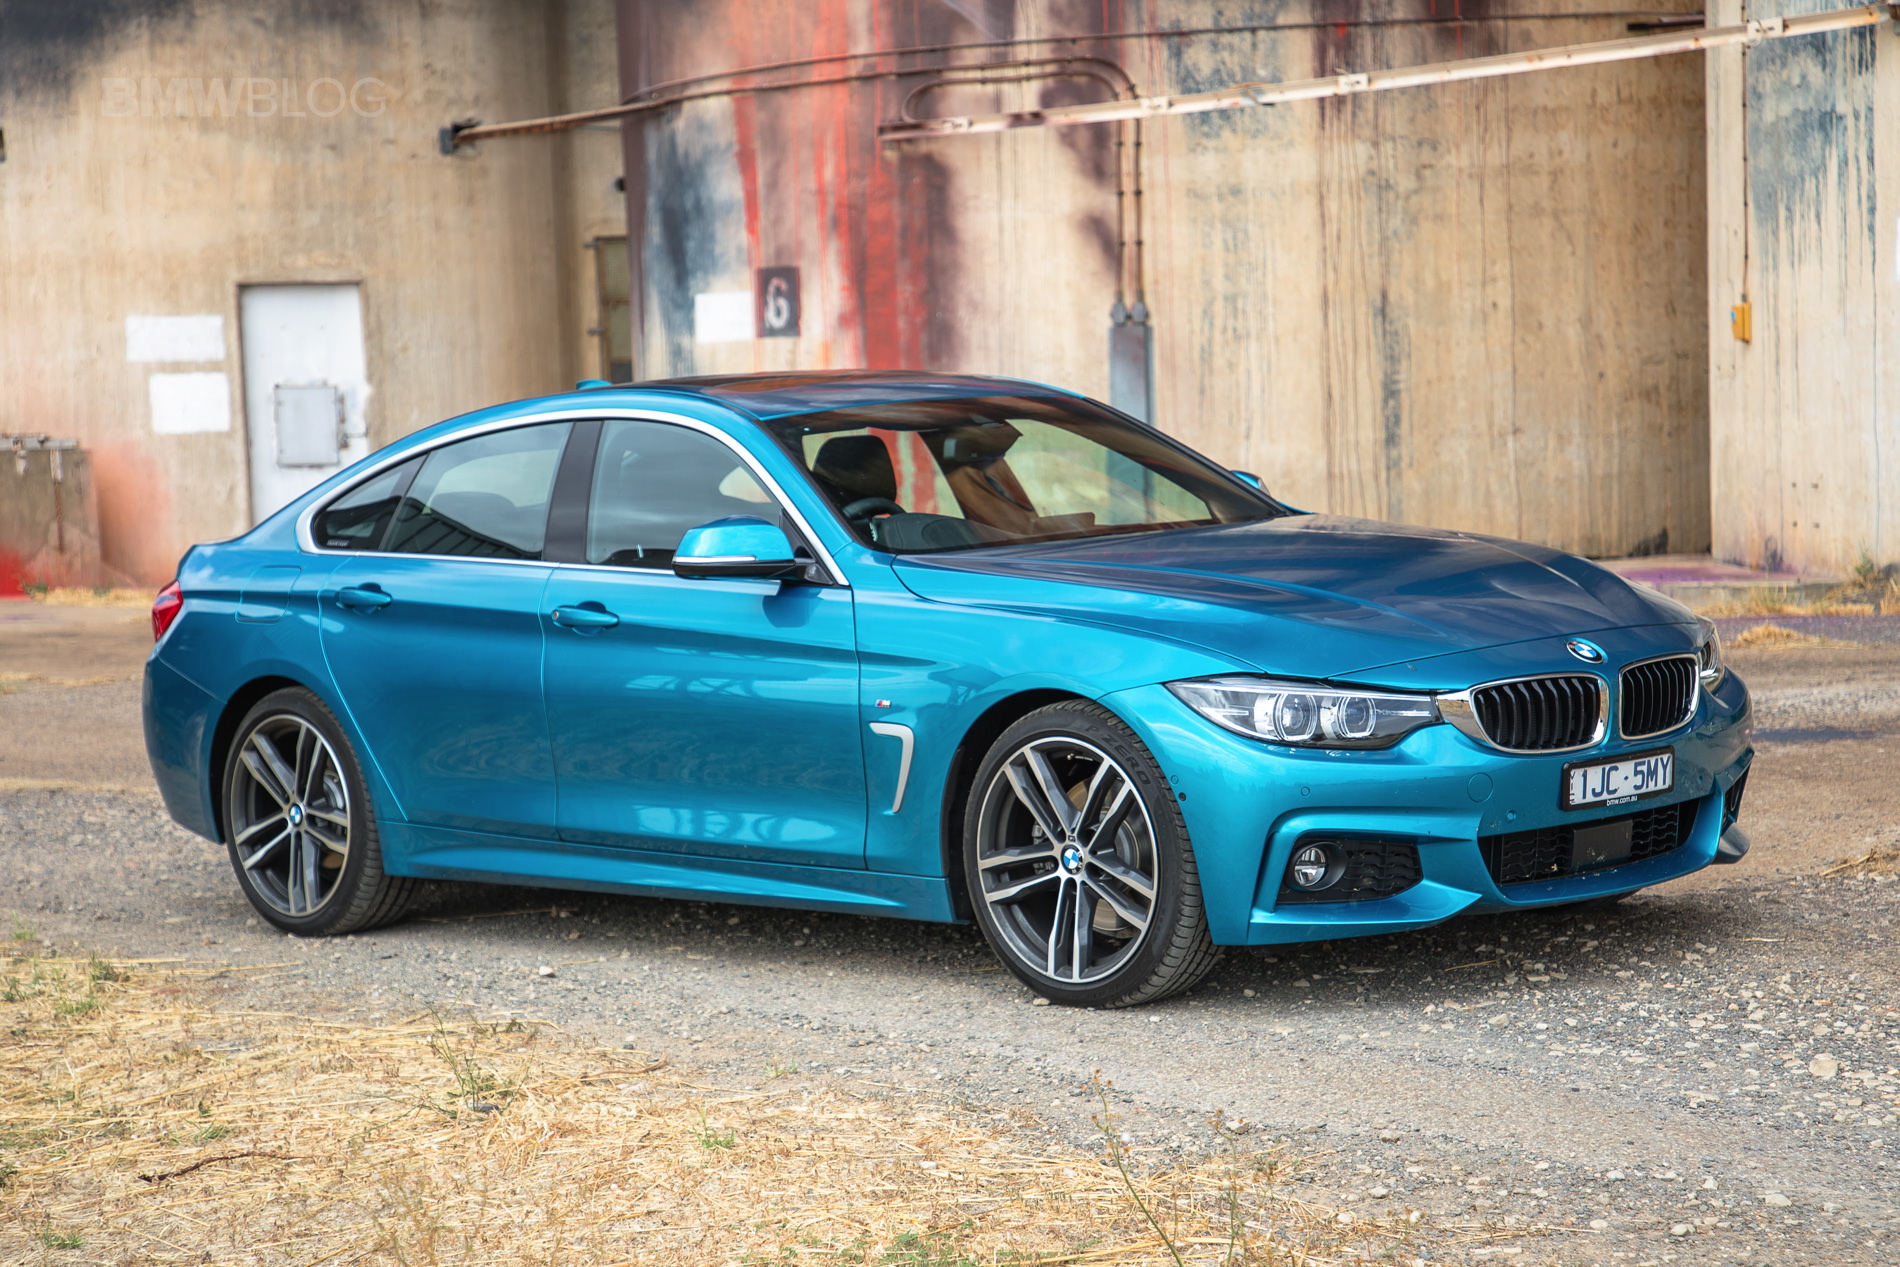 2018 BMW 430i Gran Coupe – Life’s too short to drive a grey car | i NEW